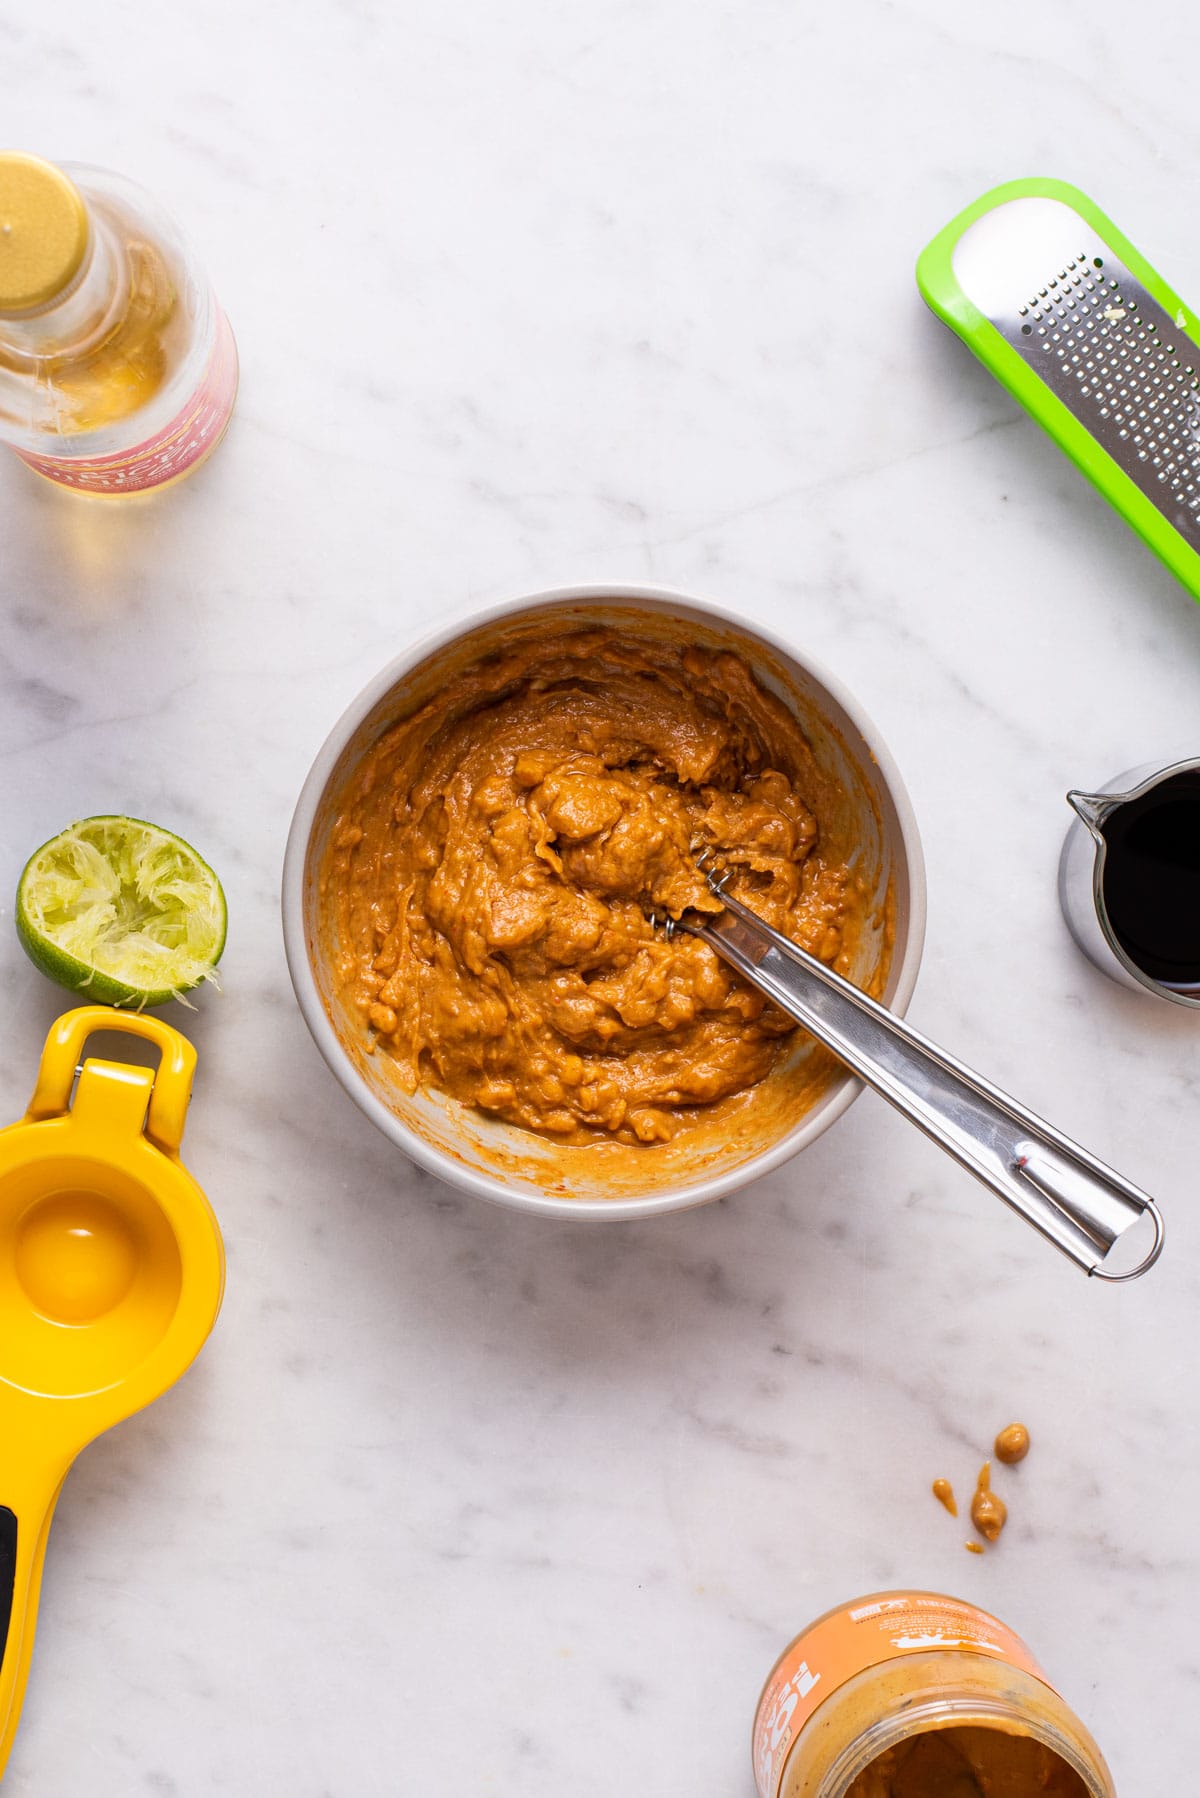 Whisking peanut sauce in a bowl.